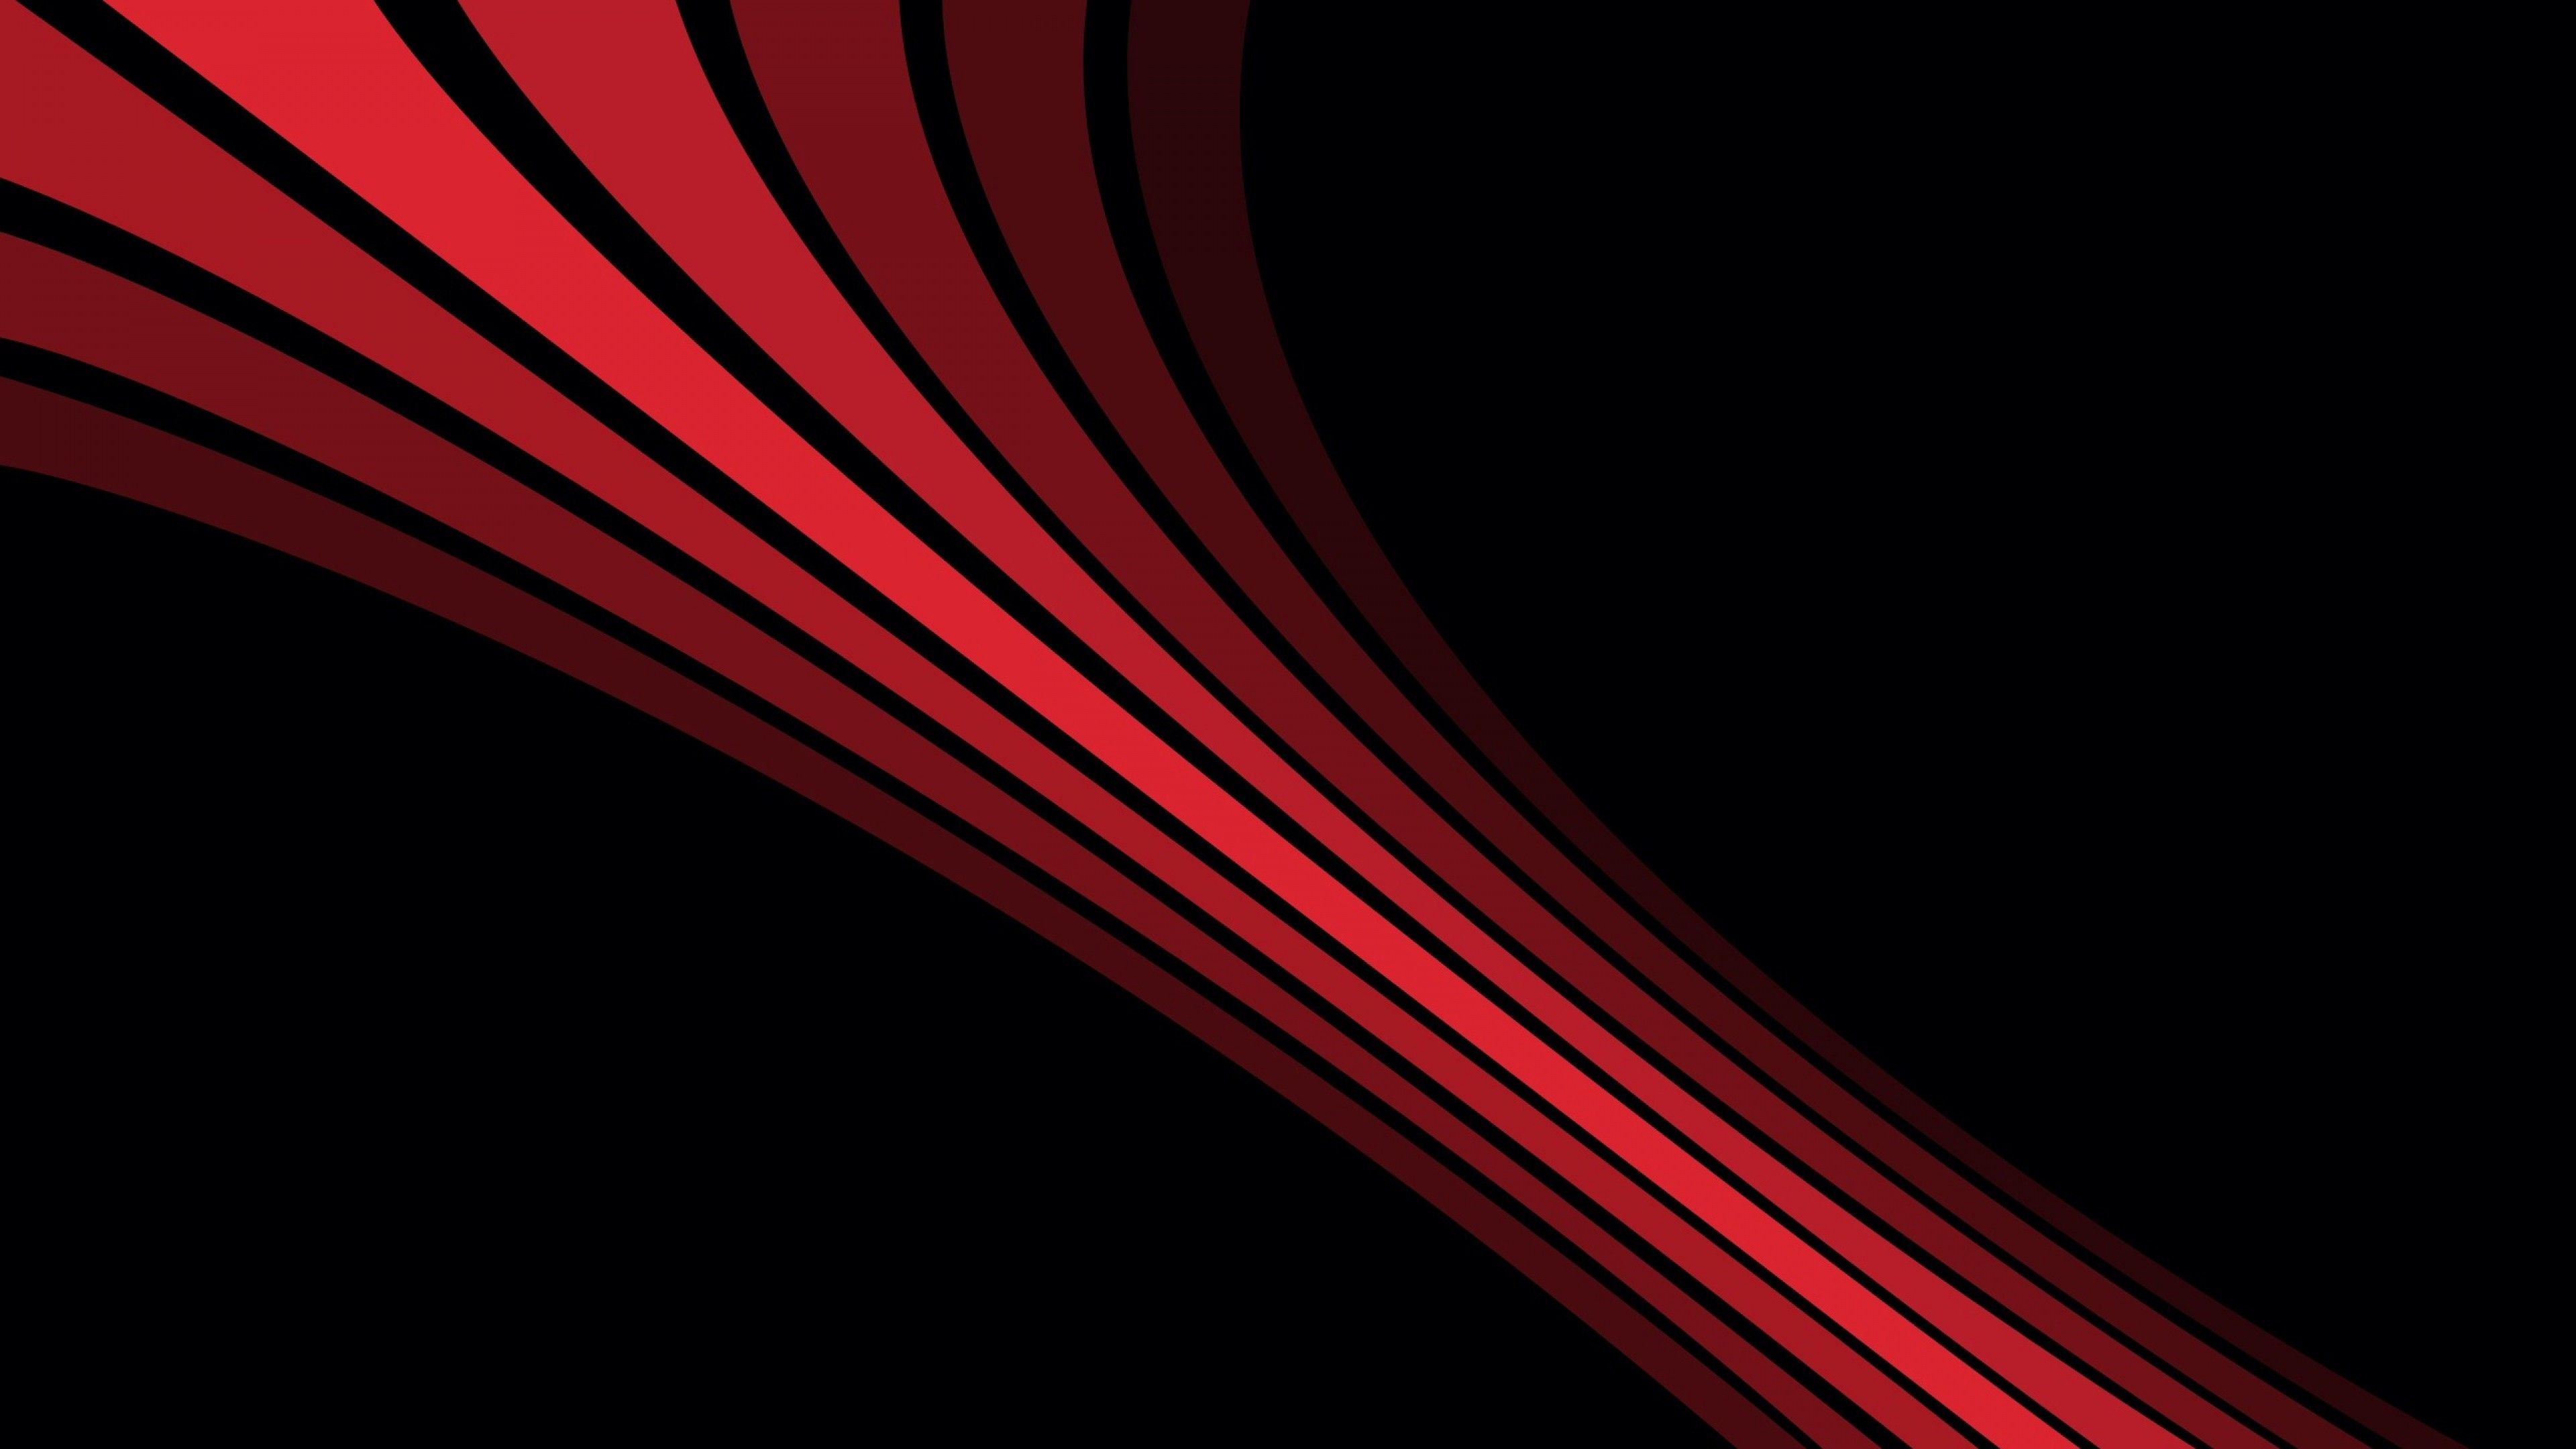 Black And Red Abstract Wallpaper 4k